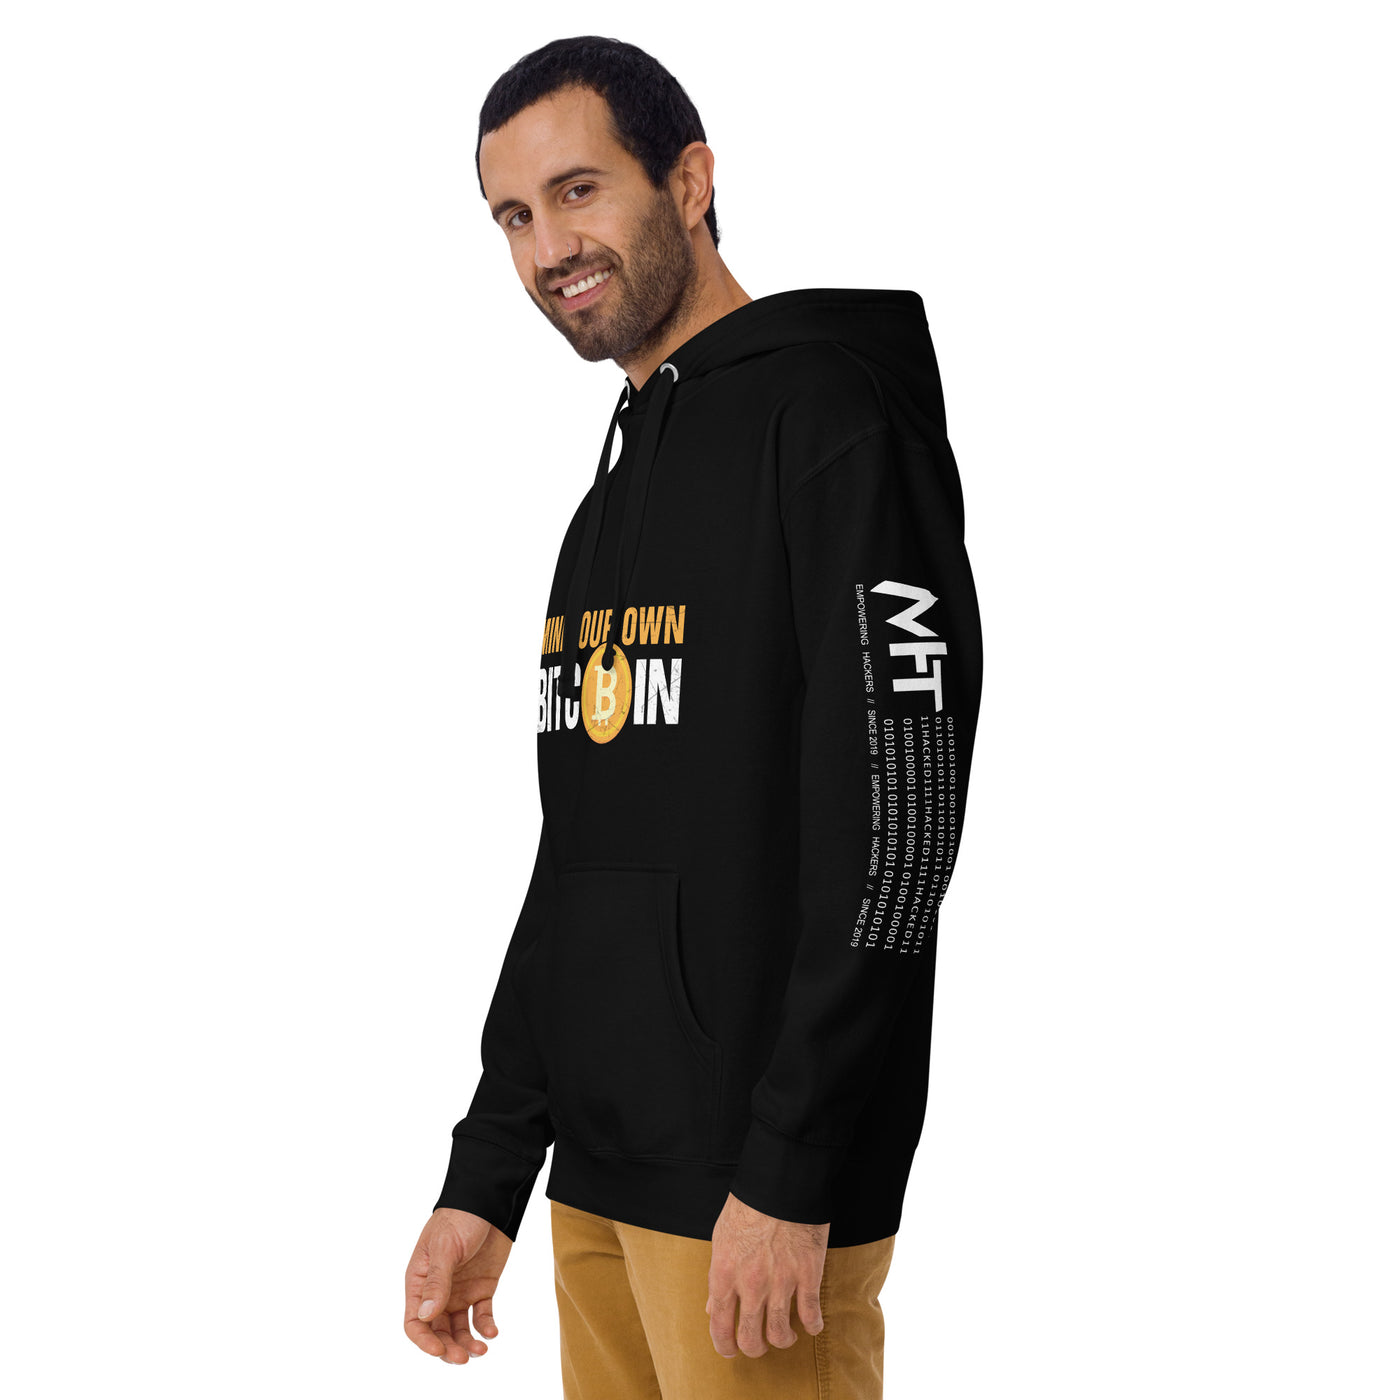 Mind Your Own Bitcoin Unisex Hoodie